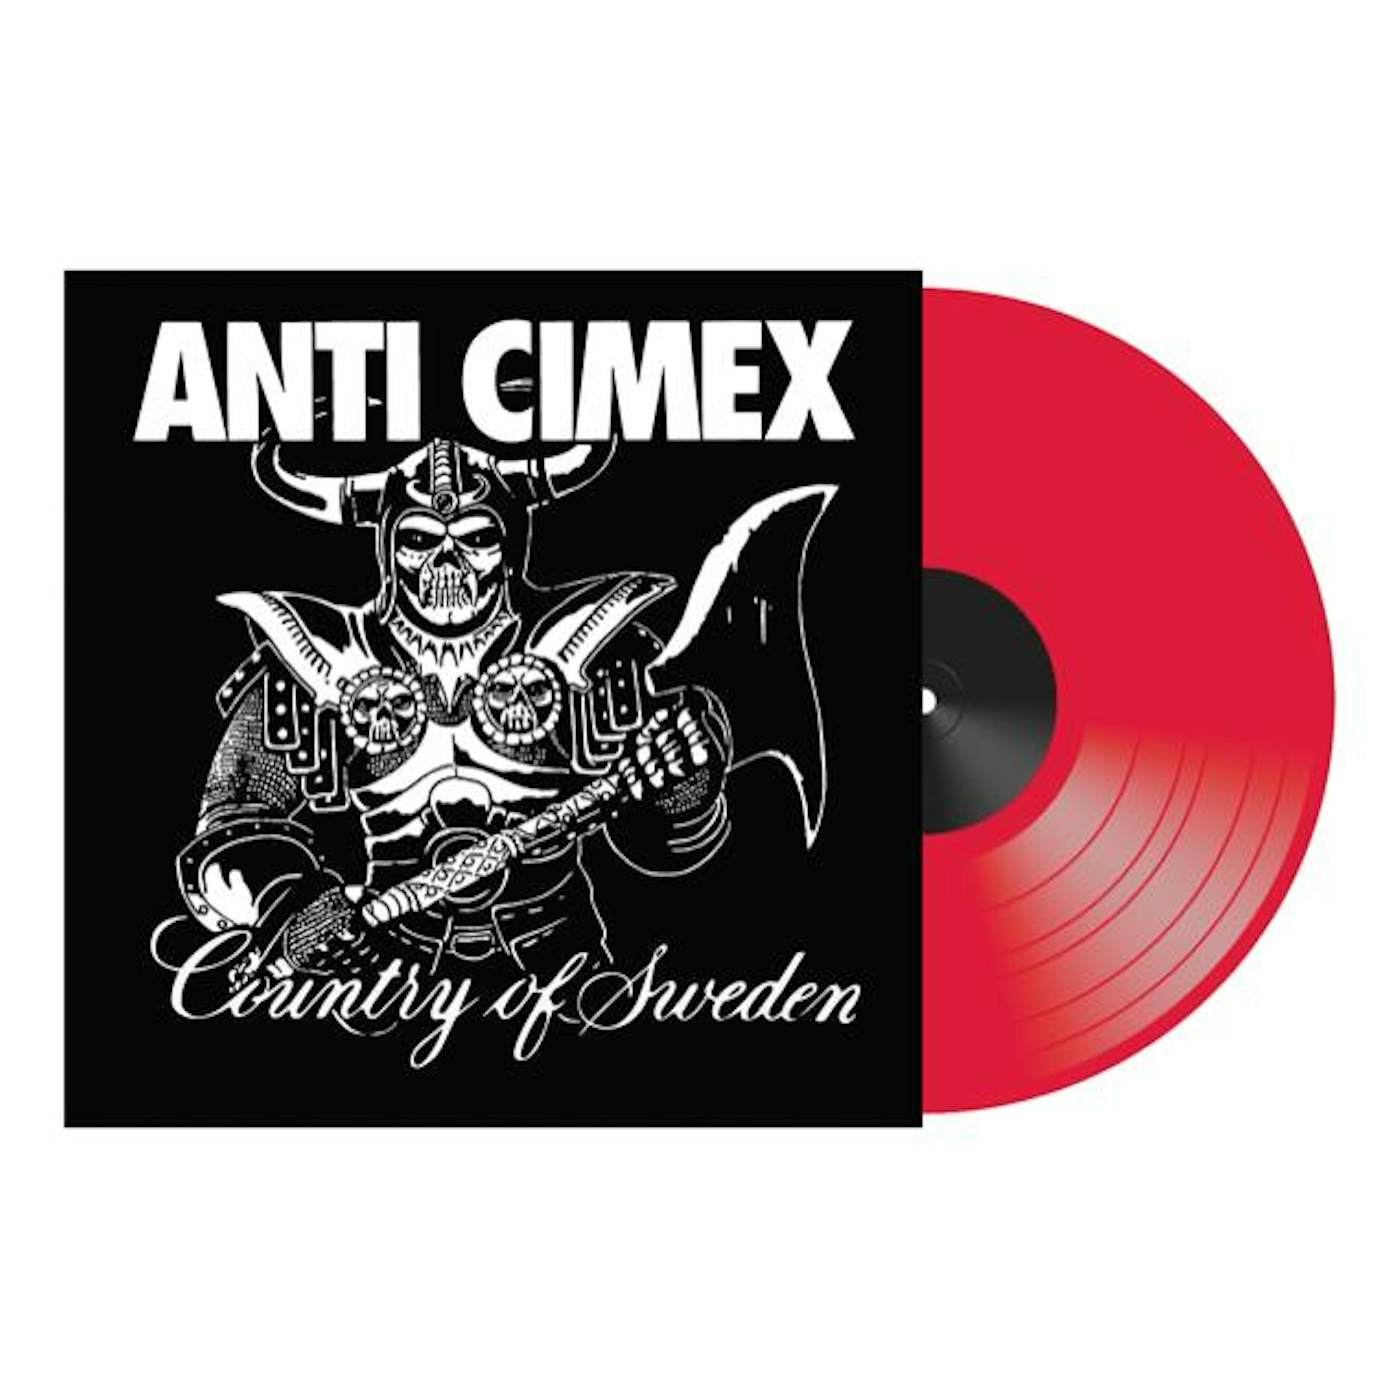 Anti Cimex ABSOLUTE - COUNTRY OF SWEDEN Vinyl Record